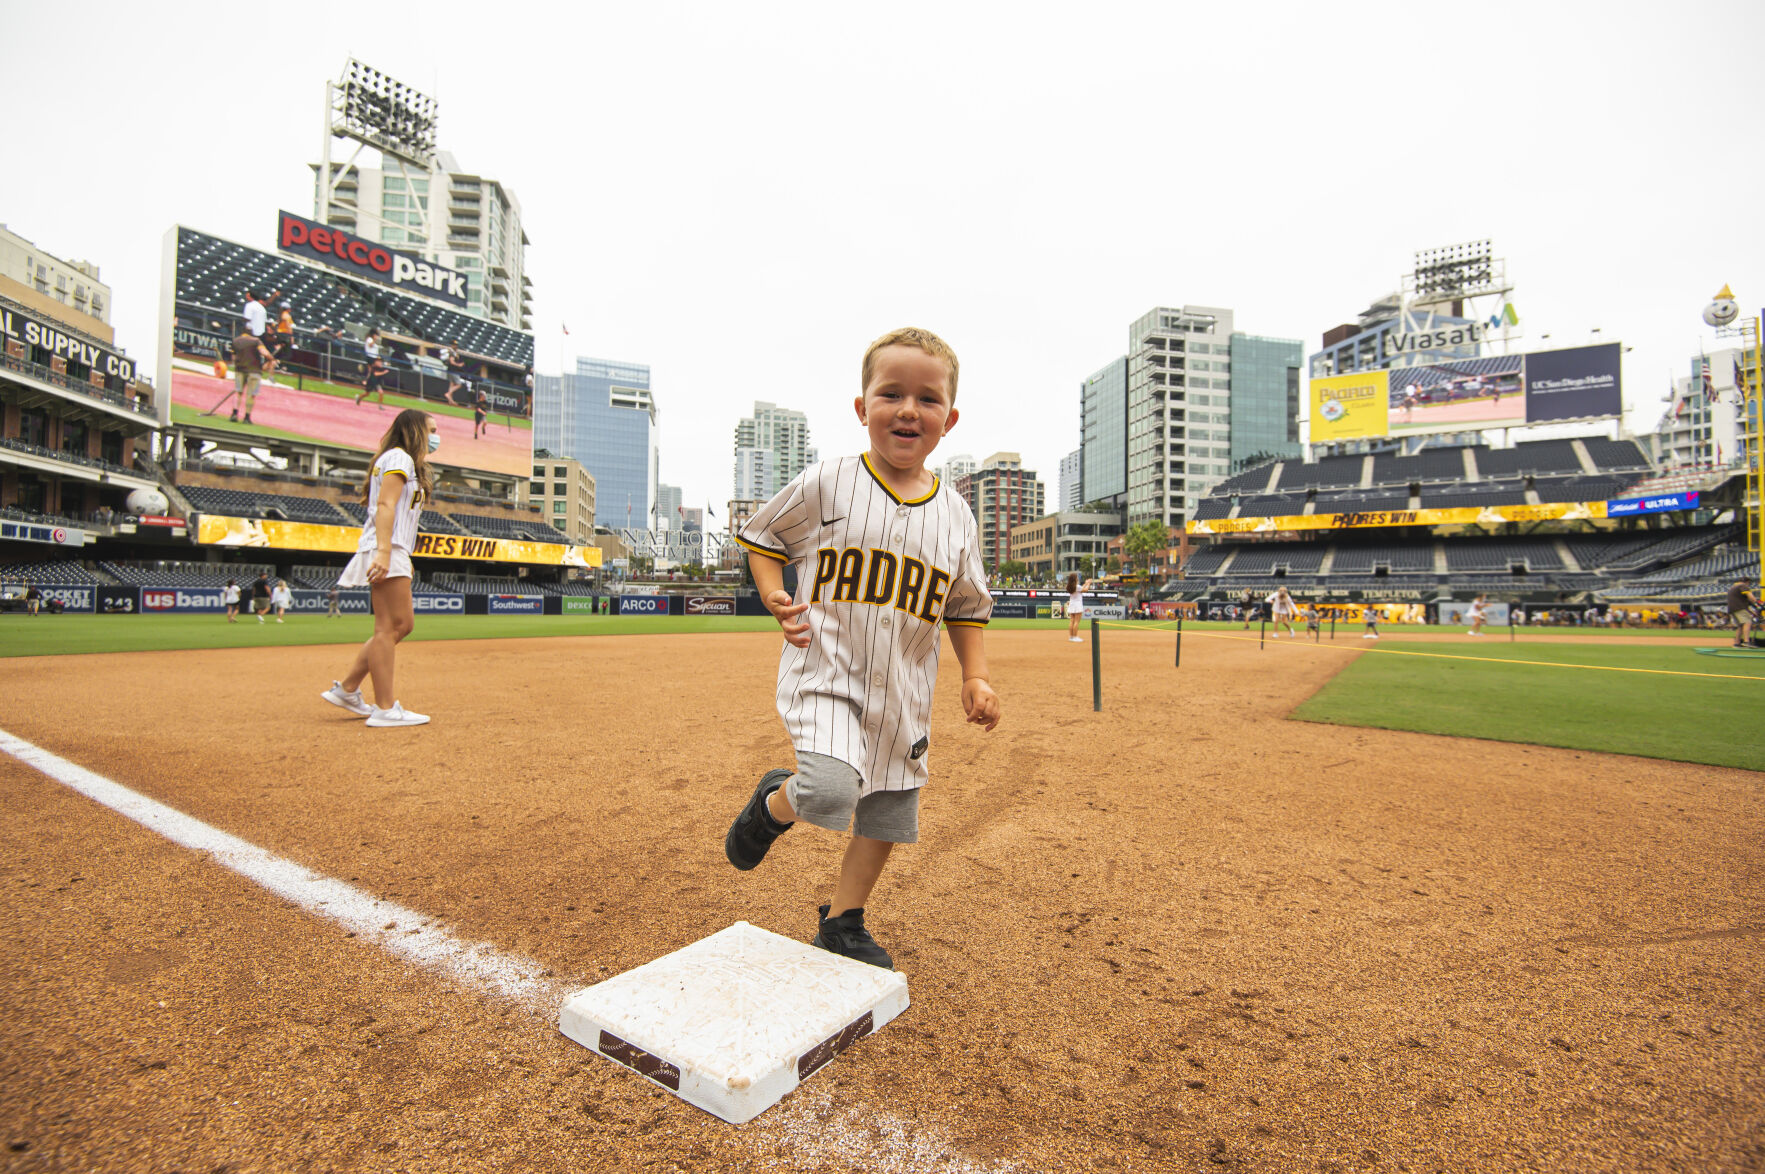 Make Memories with the Whole Family at Petco Park - San Diego Magazine